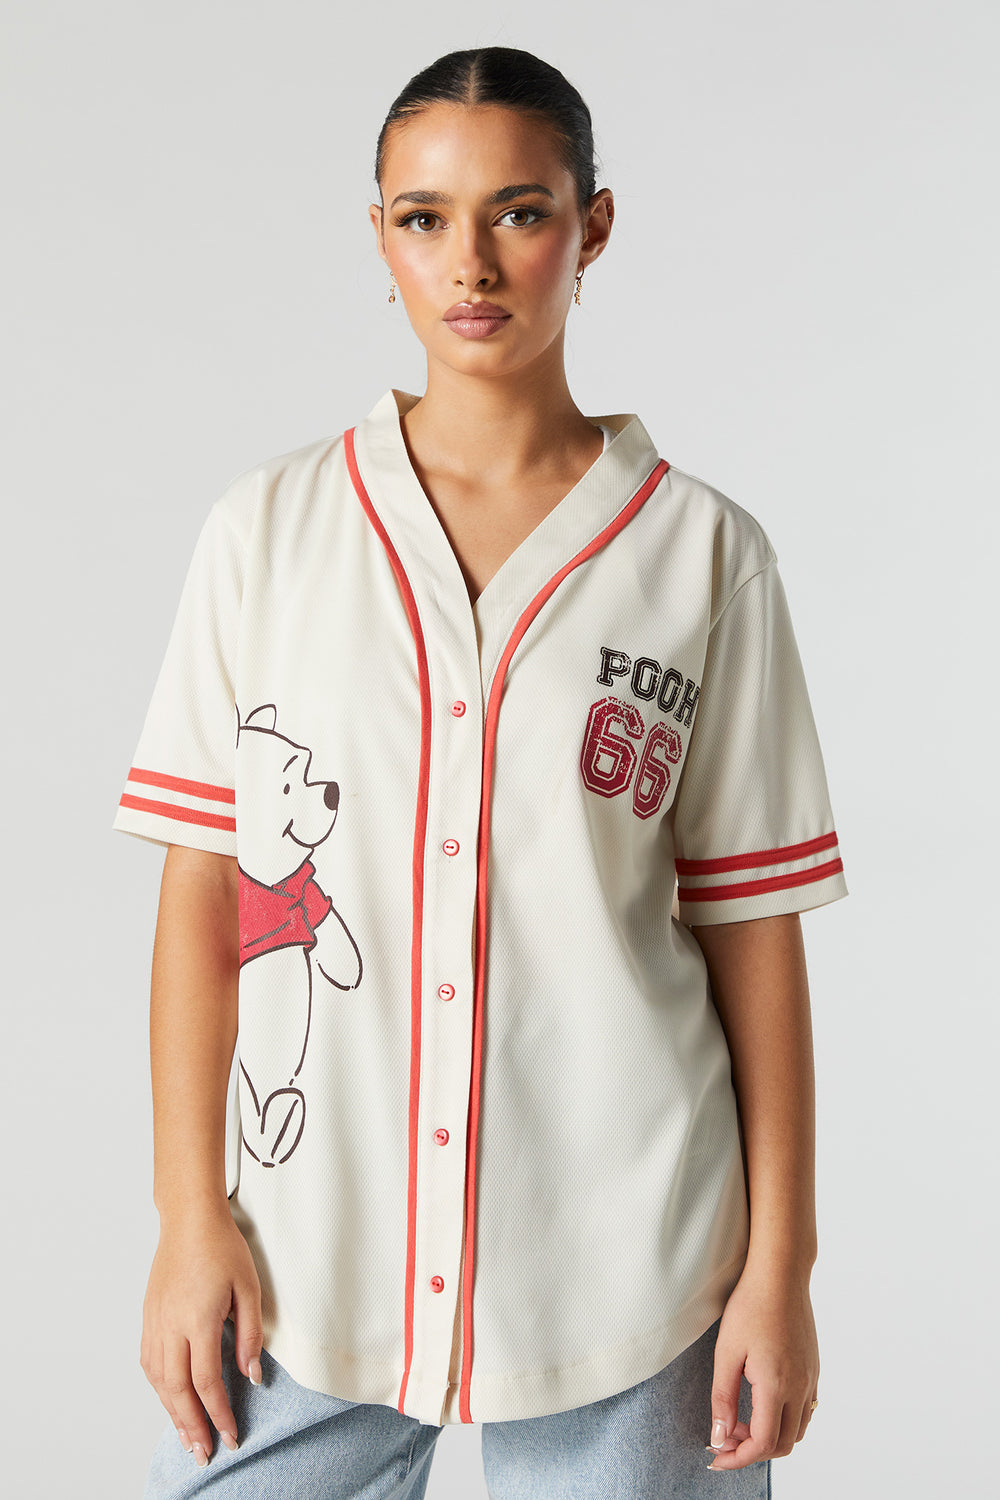 Pooh and Piglet Graphic Baseball Jersey Pooh and Piglet Graphic Baseball Jersey 2